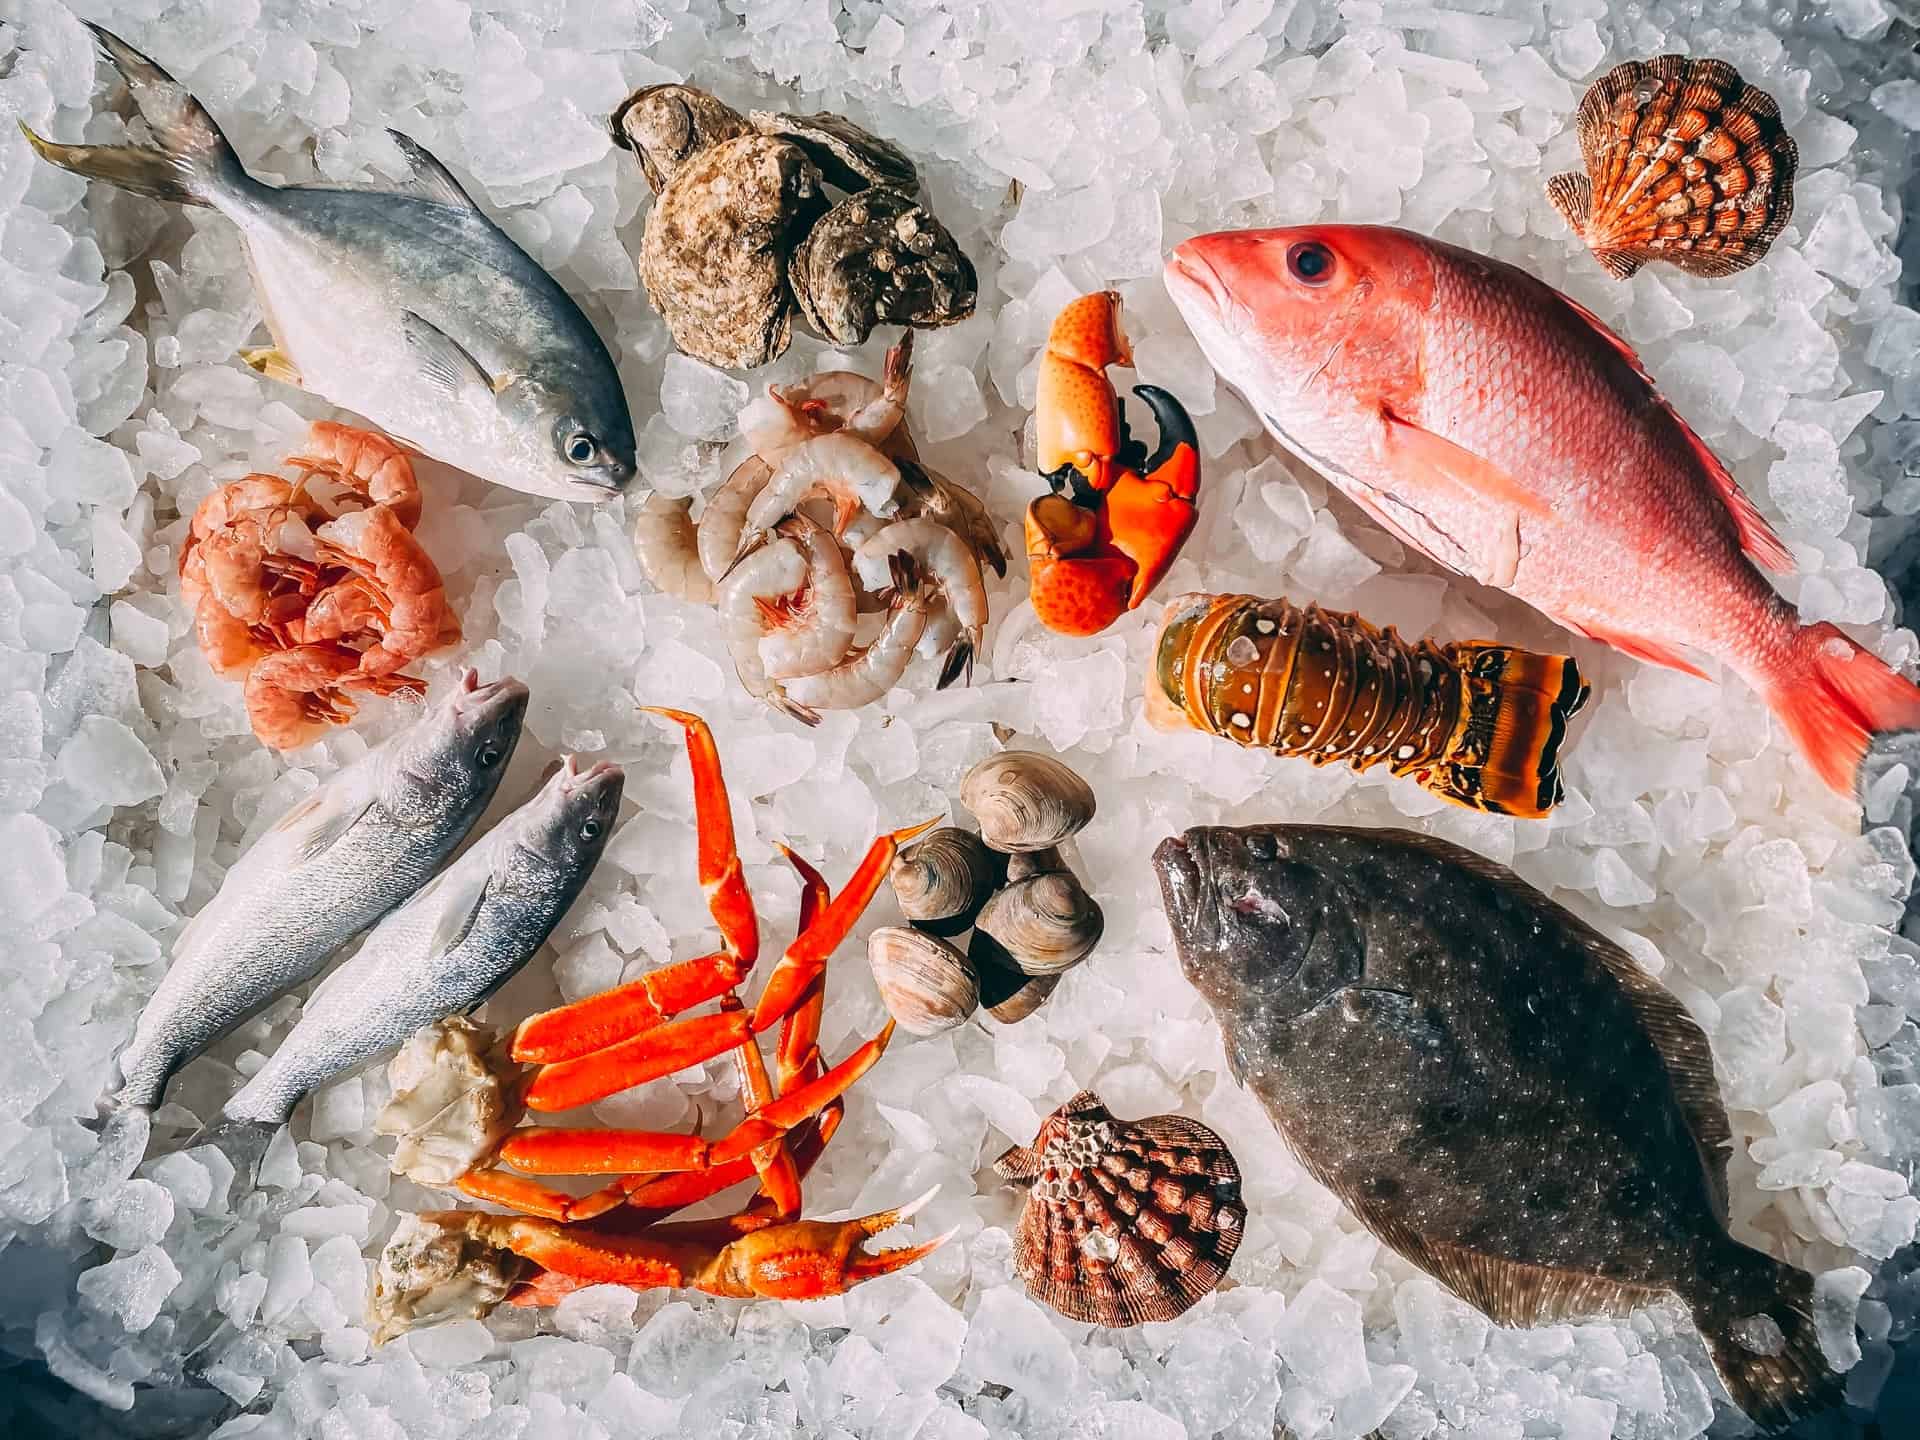 Get the Catch of the Day with these Seafood Specials Kits